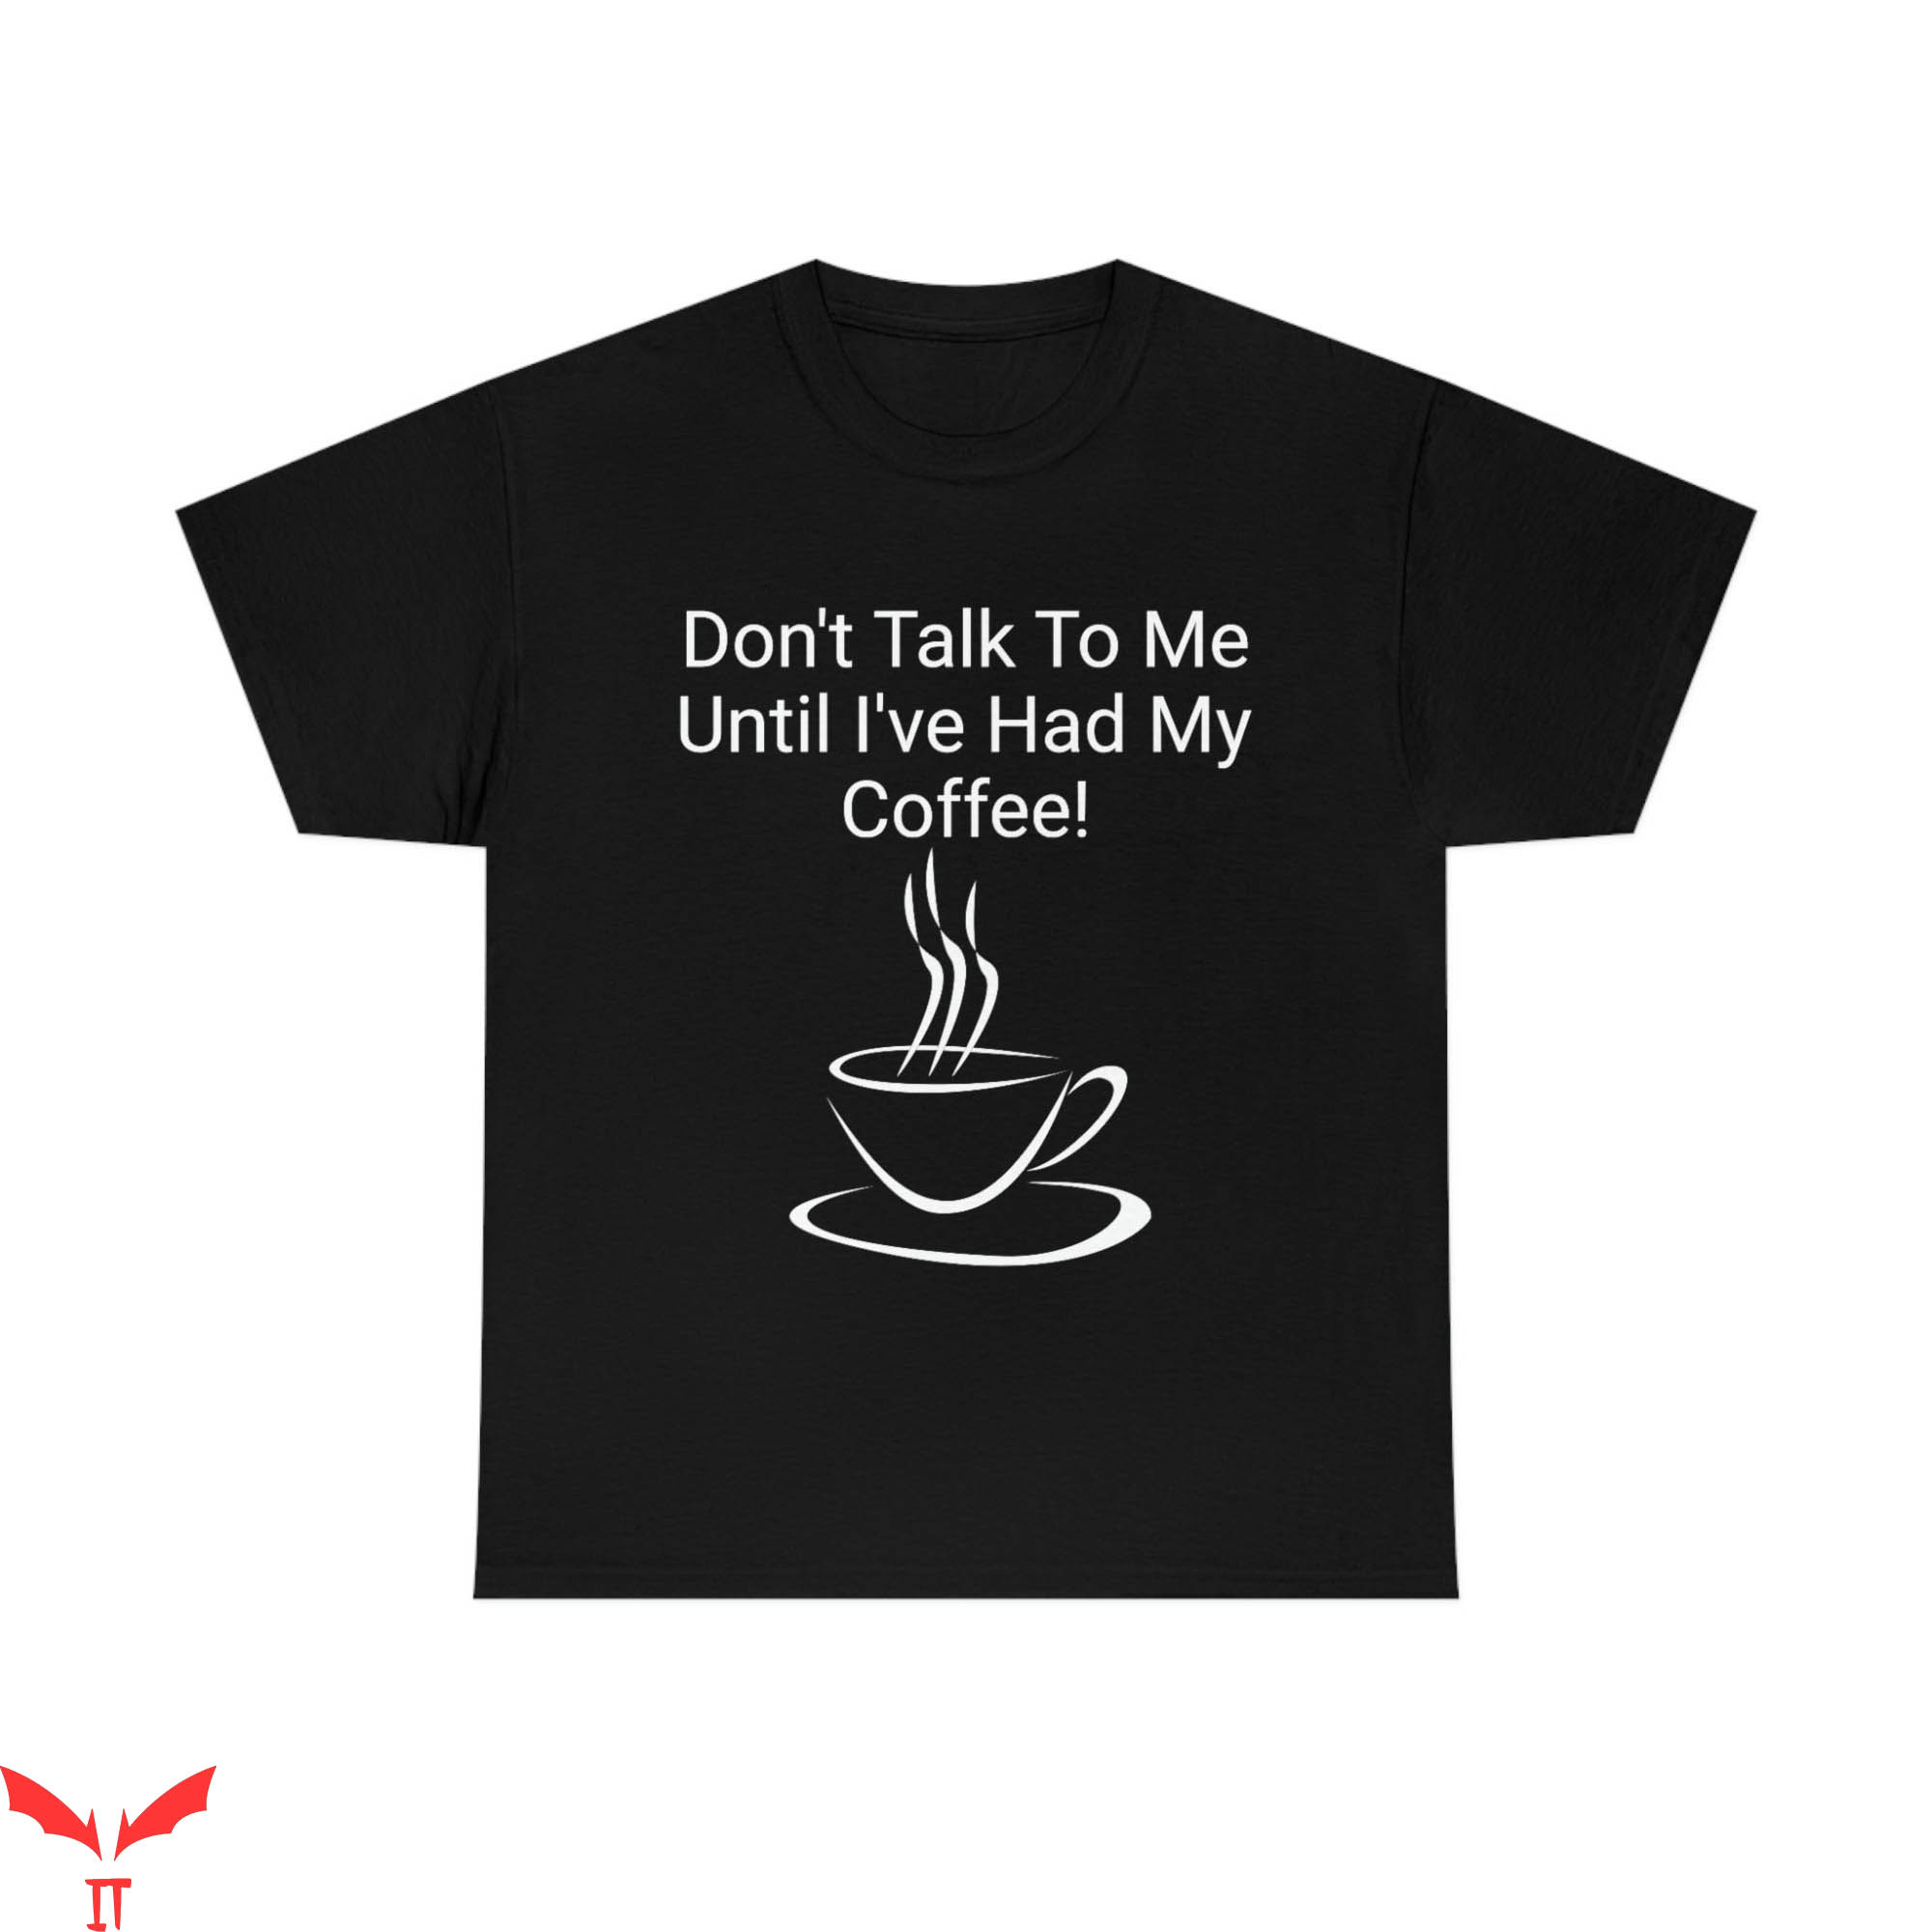 Don't Talk To Me T-Shirt I've Had My Coffee Trendy Tee